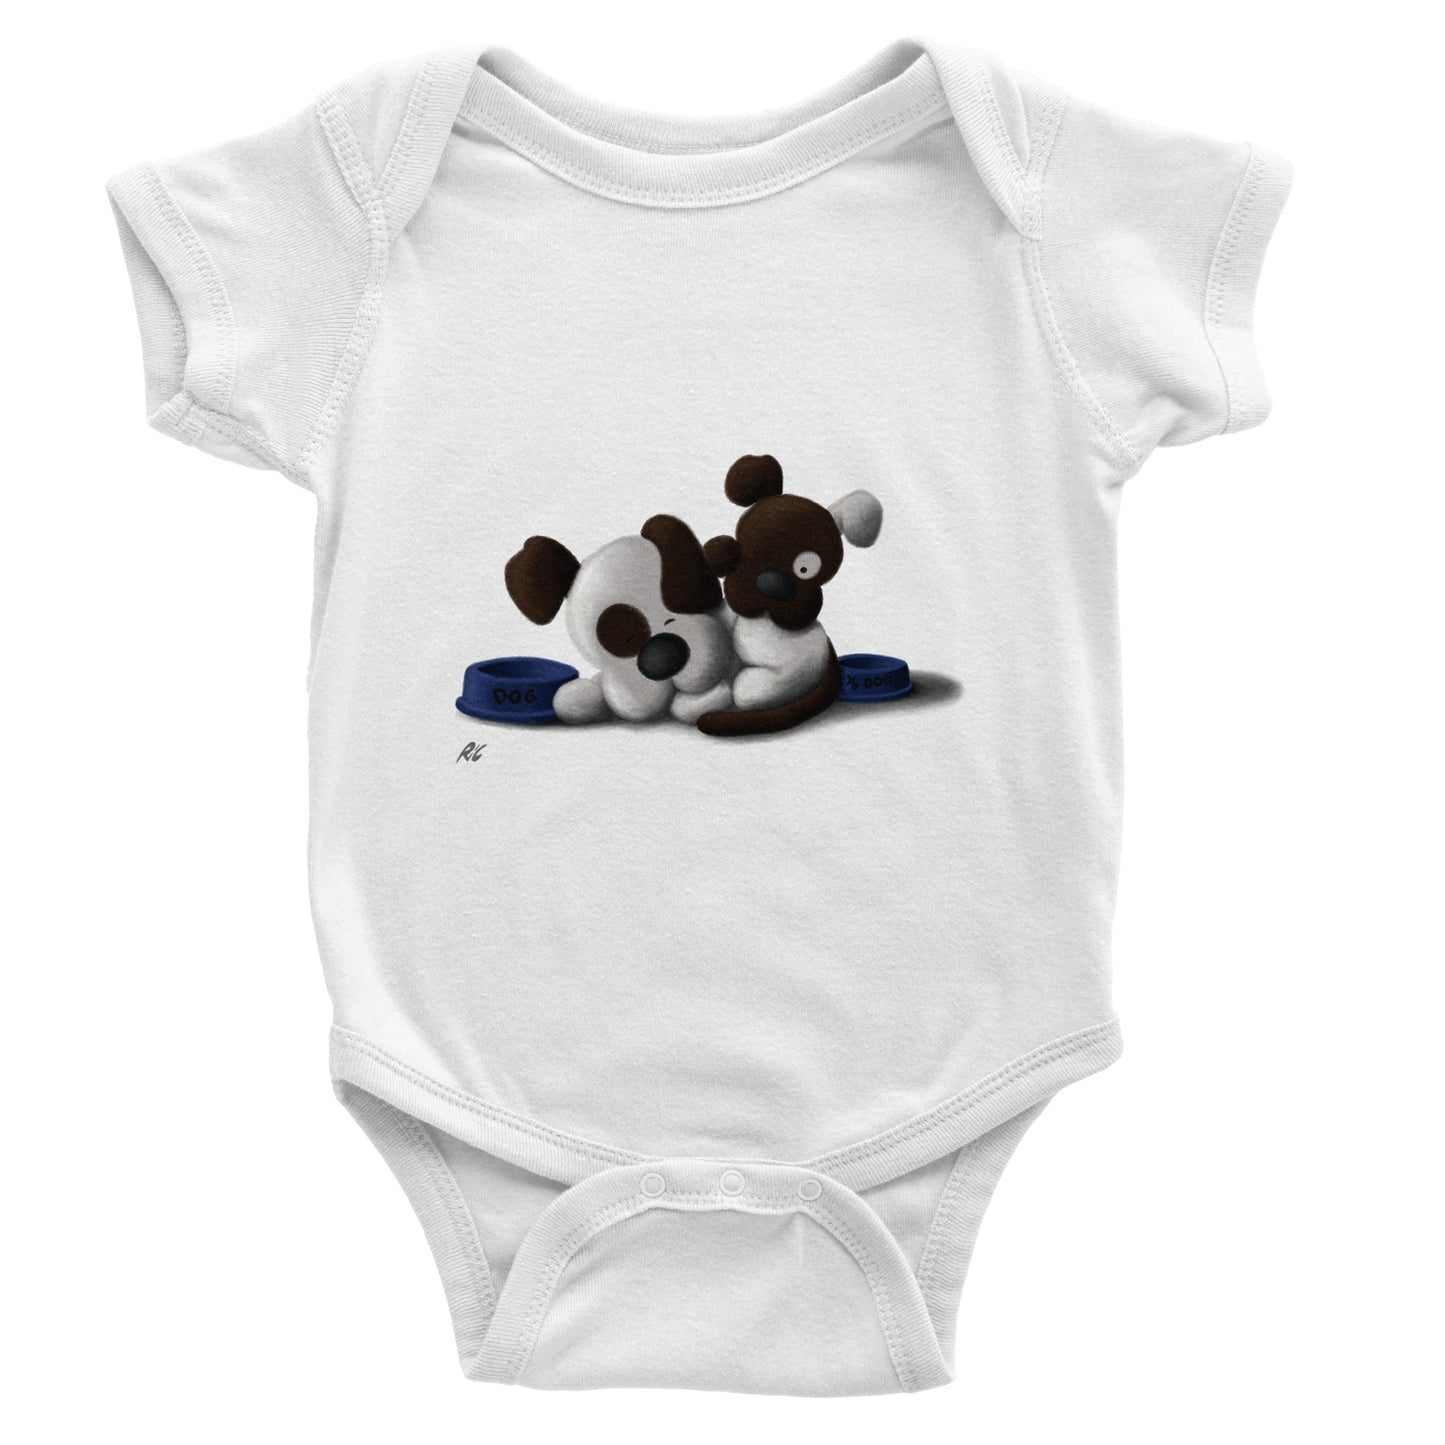 "Wake up Dad, it's time for Dinner!" - Classic Baby Short Sleeve Bodysuit